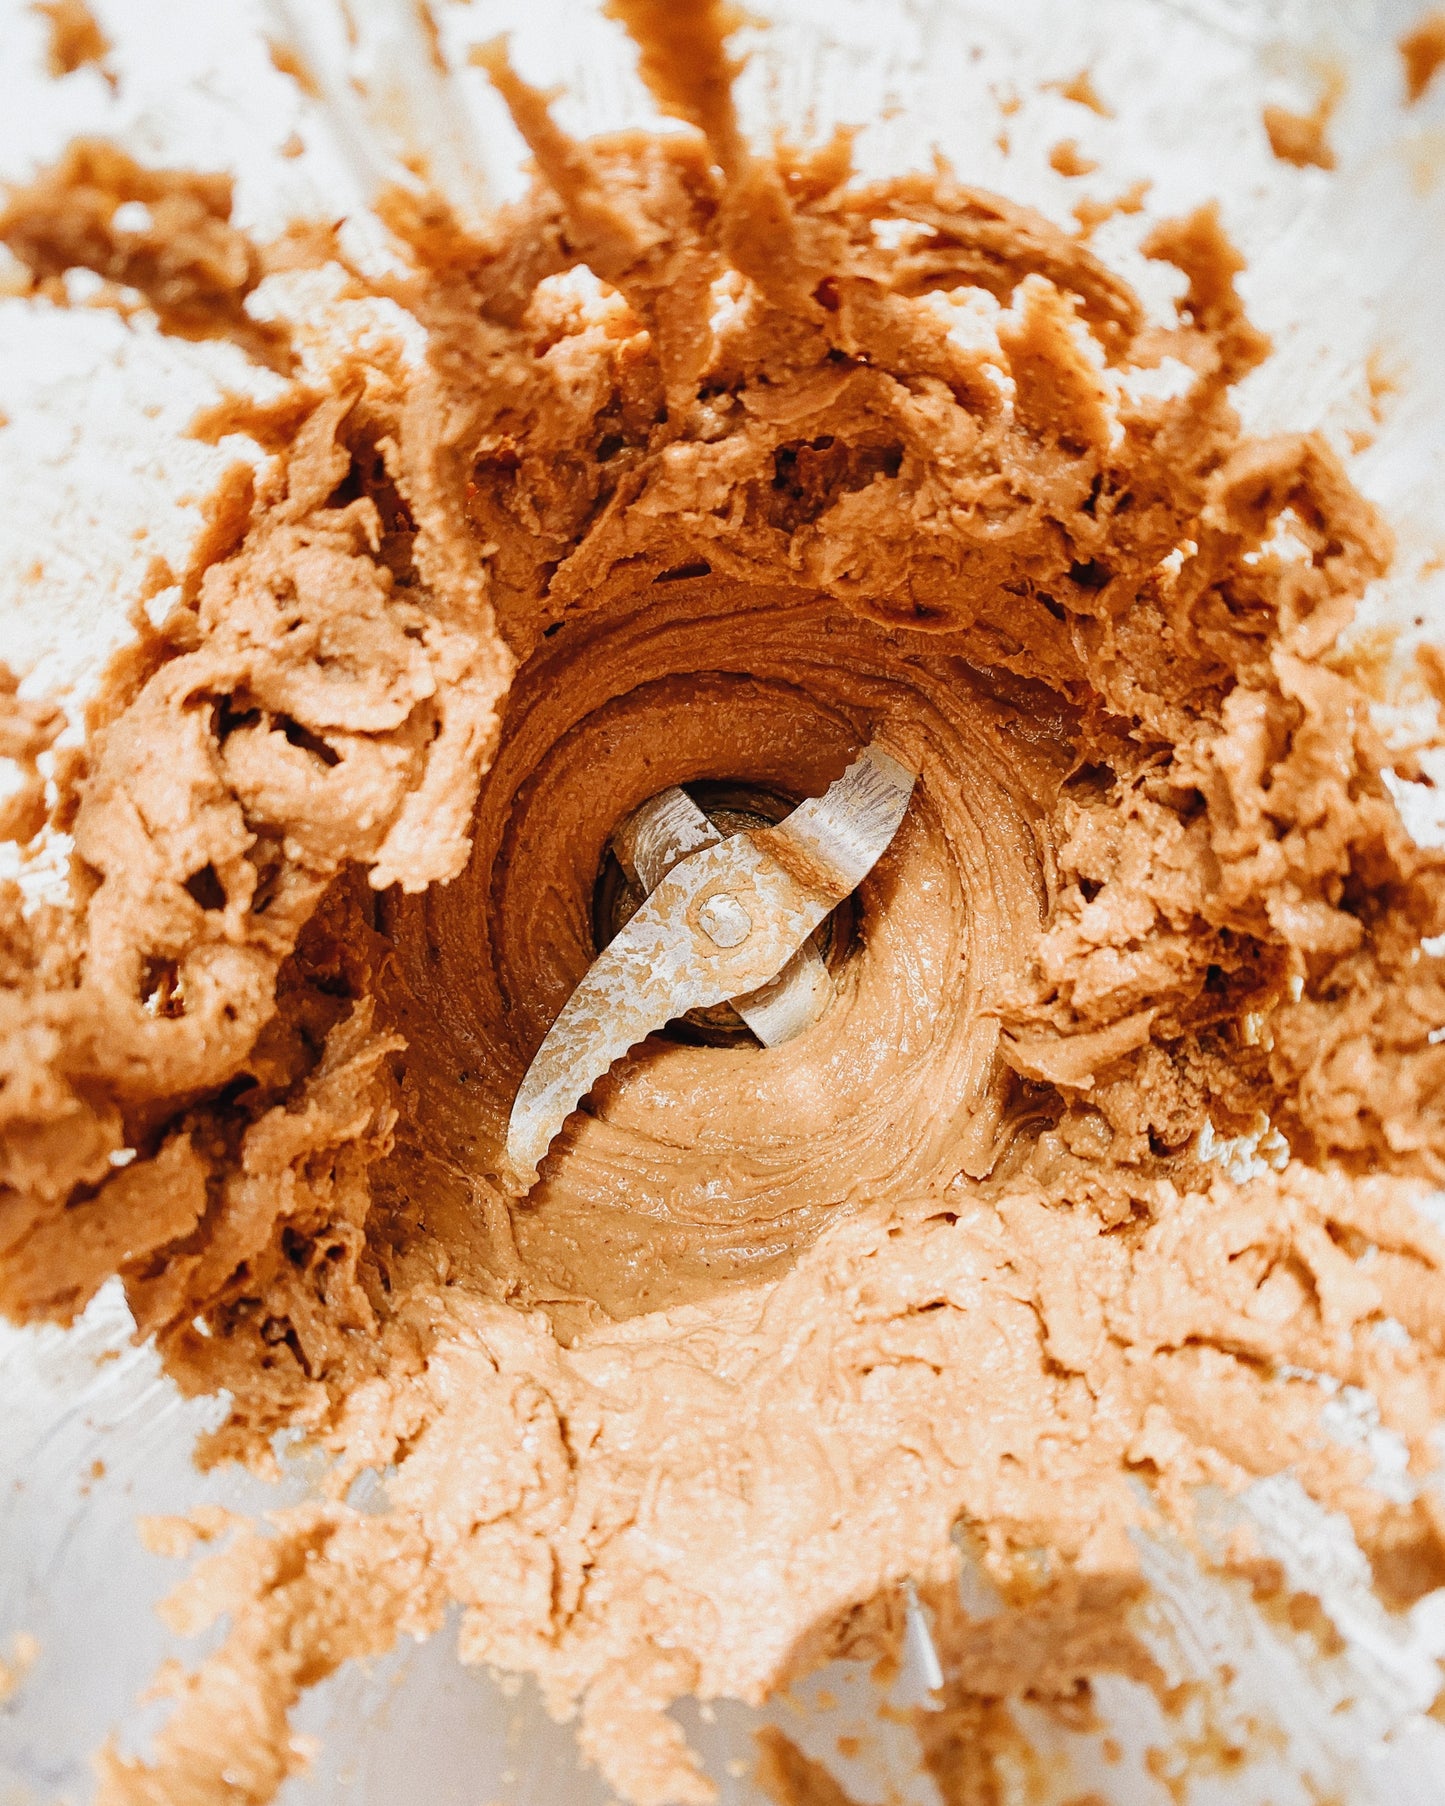 PROTEIN ALMOND BUTTER